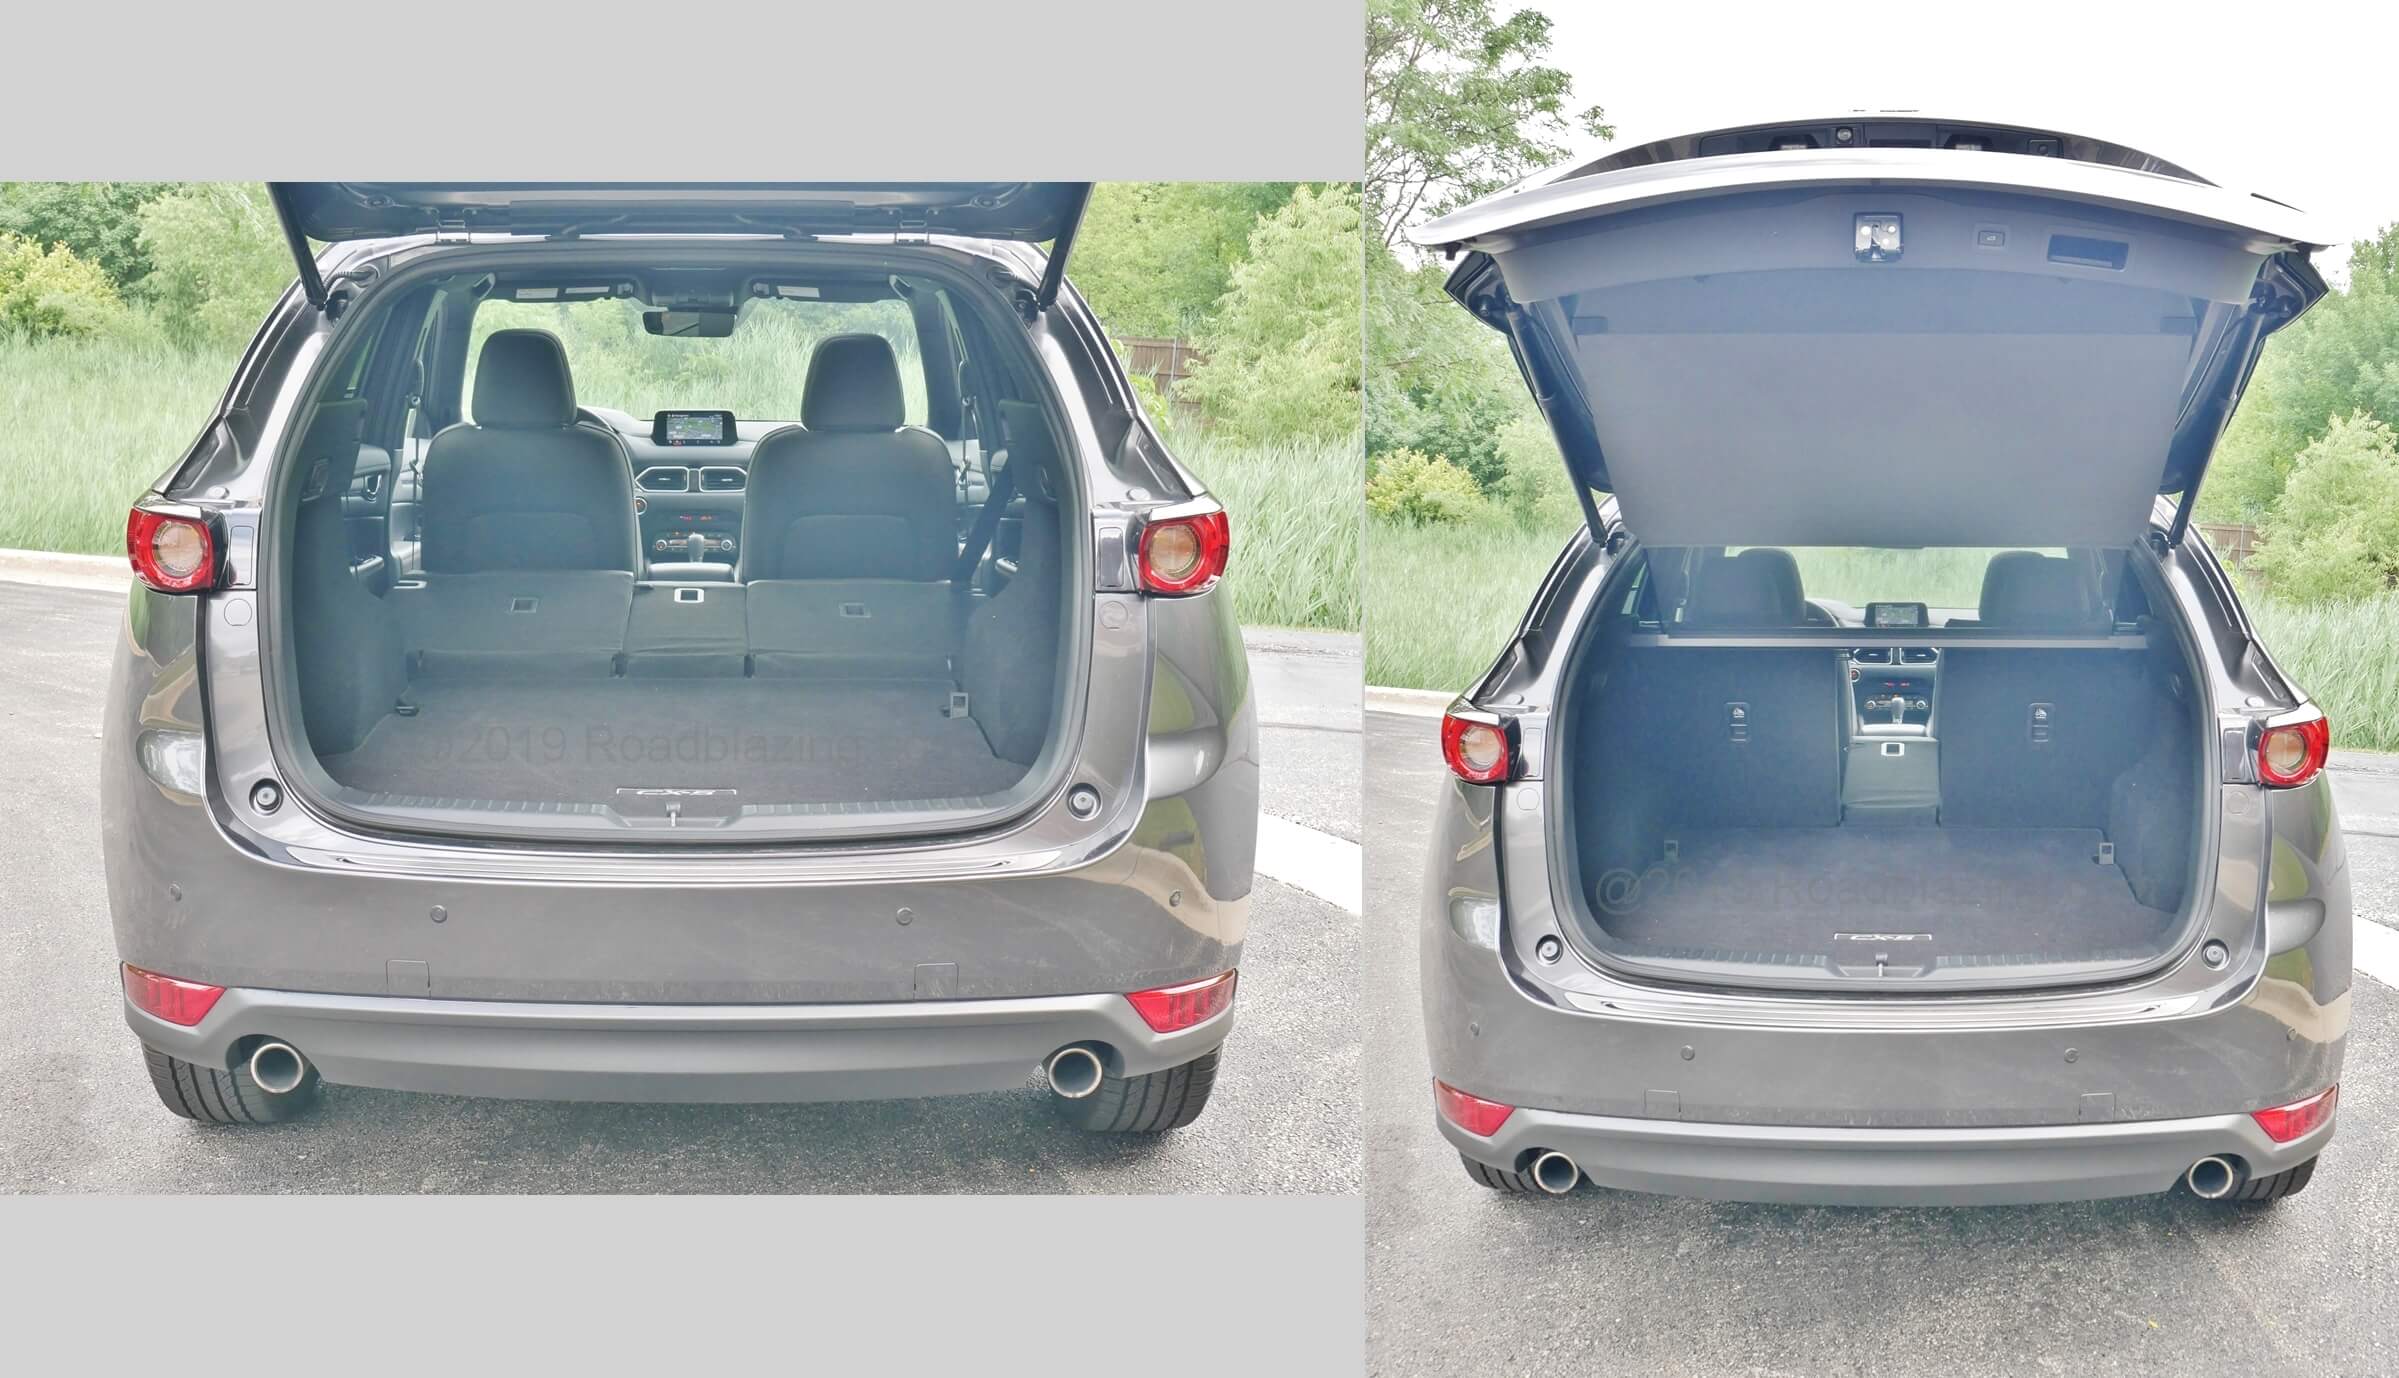 2019 Mazda CX-5 Signature AWD: Versatile and accommodating cargo bay featuring unique liftgate attaching retracting mesh privacy tonneau cover.